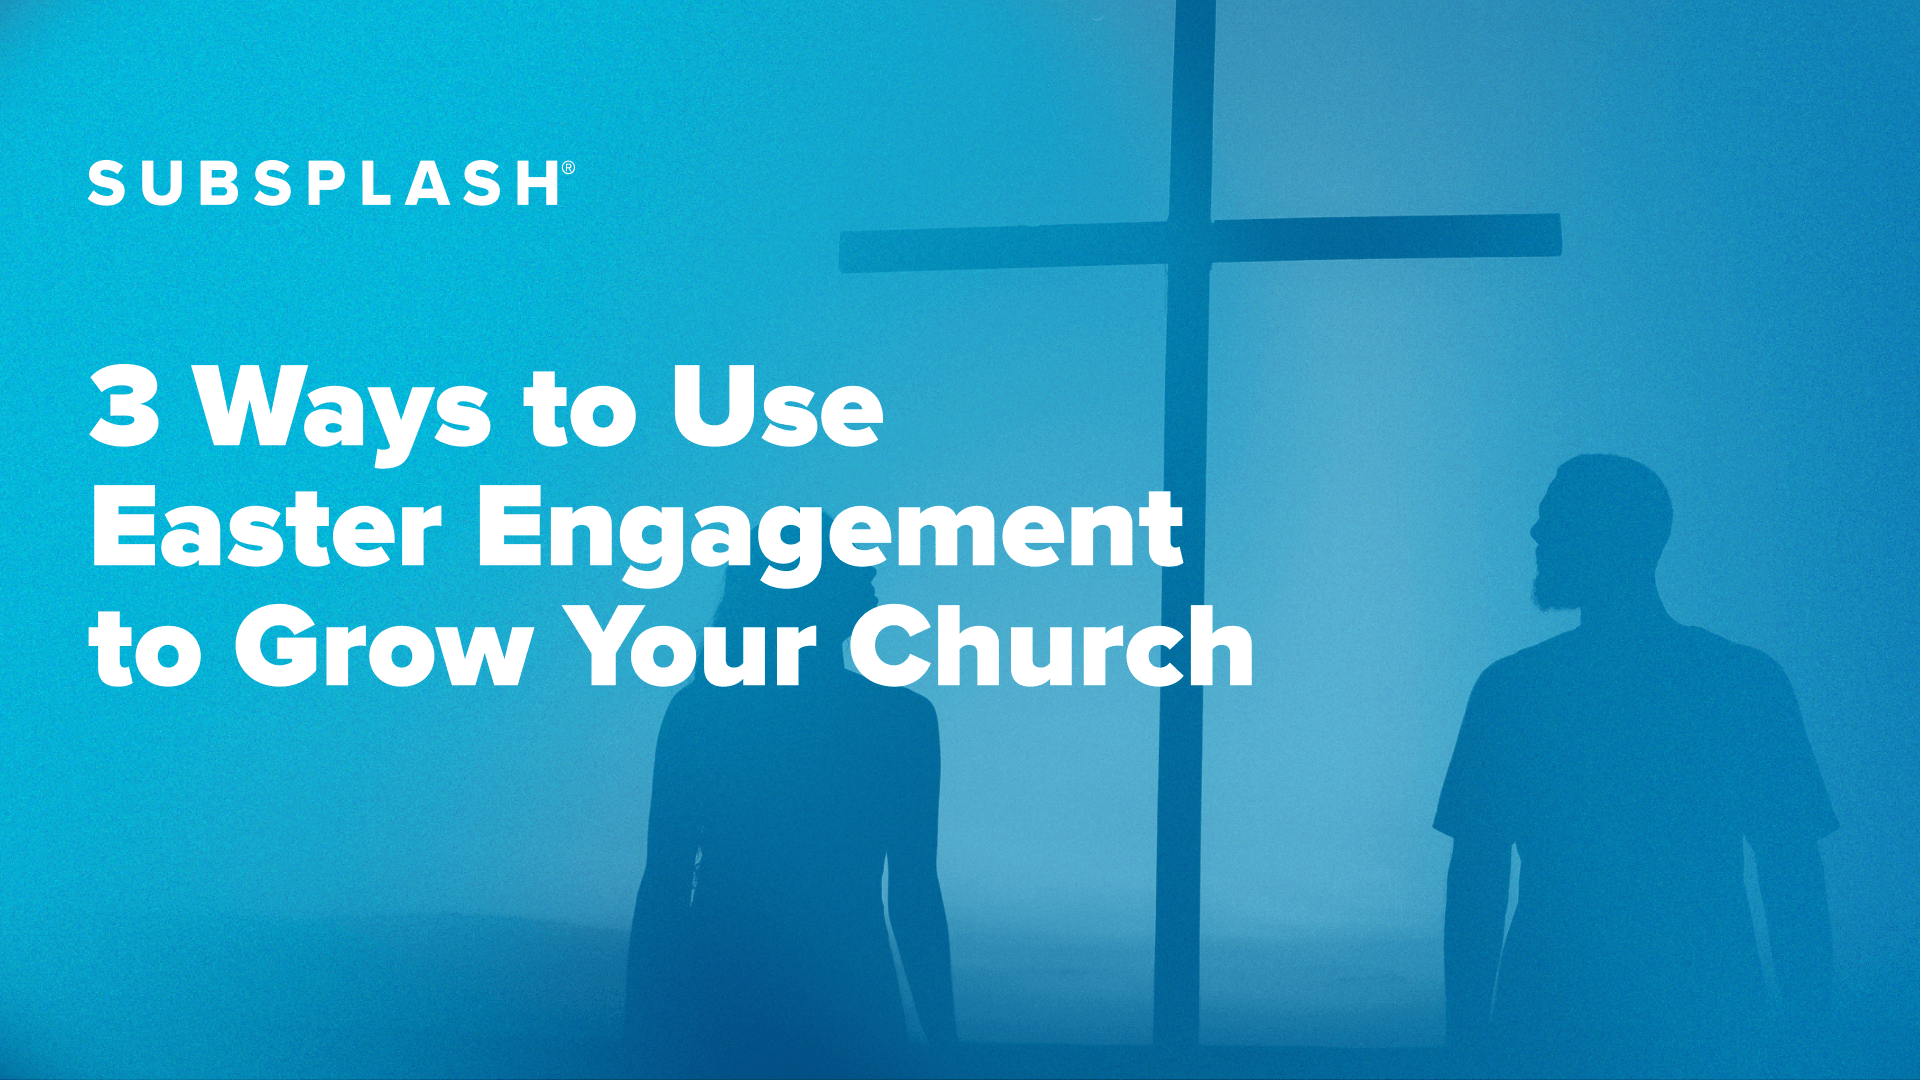 3 WAYS TO USE EASTER ENGAGEMENT TO GROW YOUR CHURCH